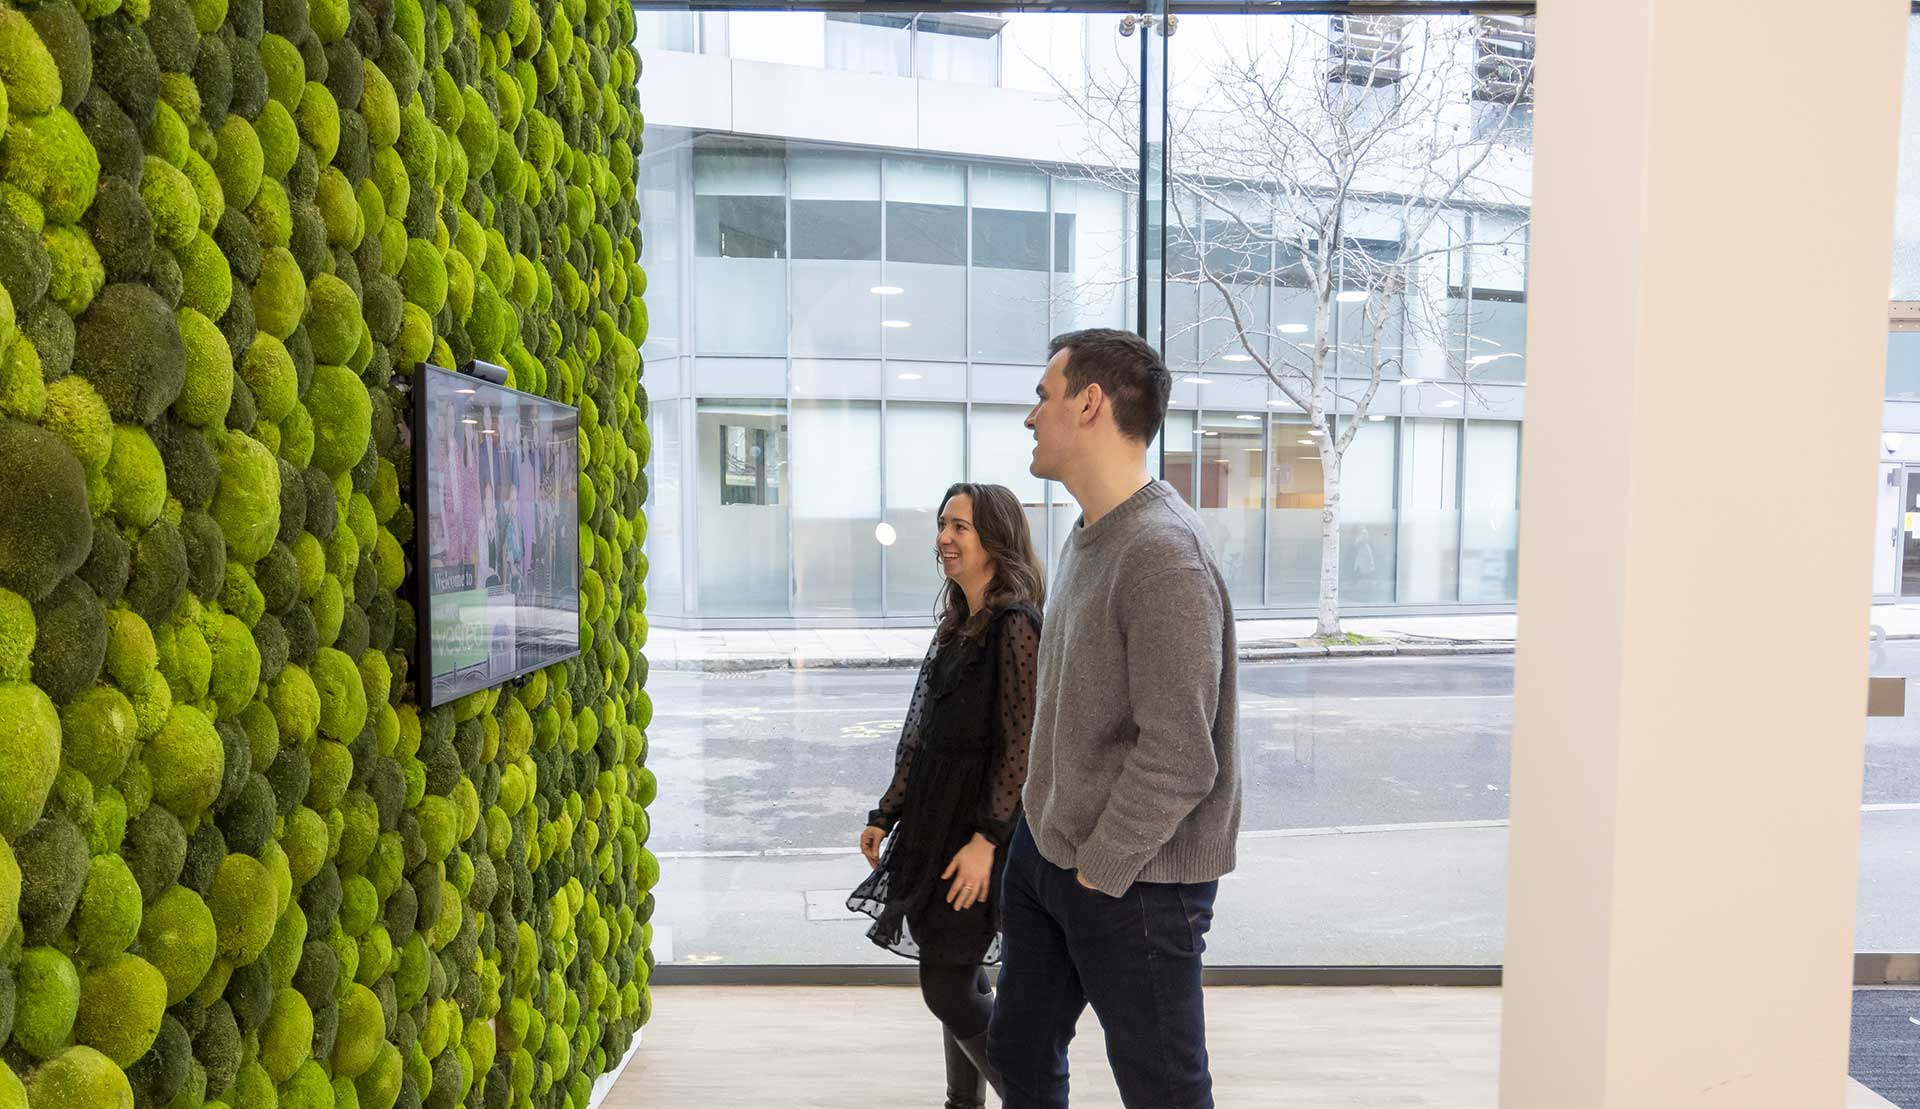 A man and a woman in the entry way of the London headquarters viewing a monitor screen mounted on a textured green wall.